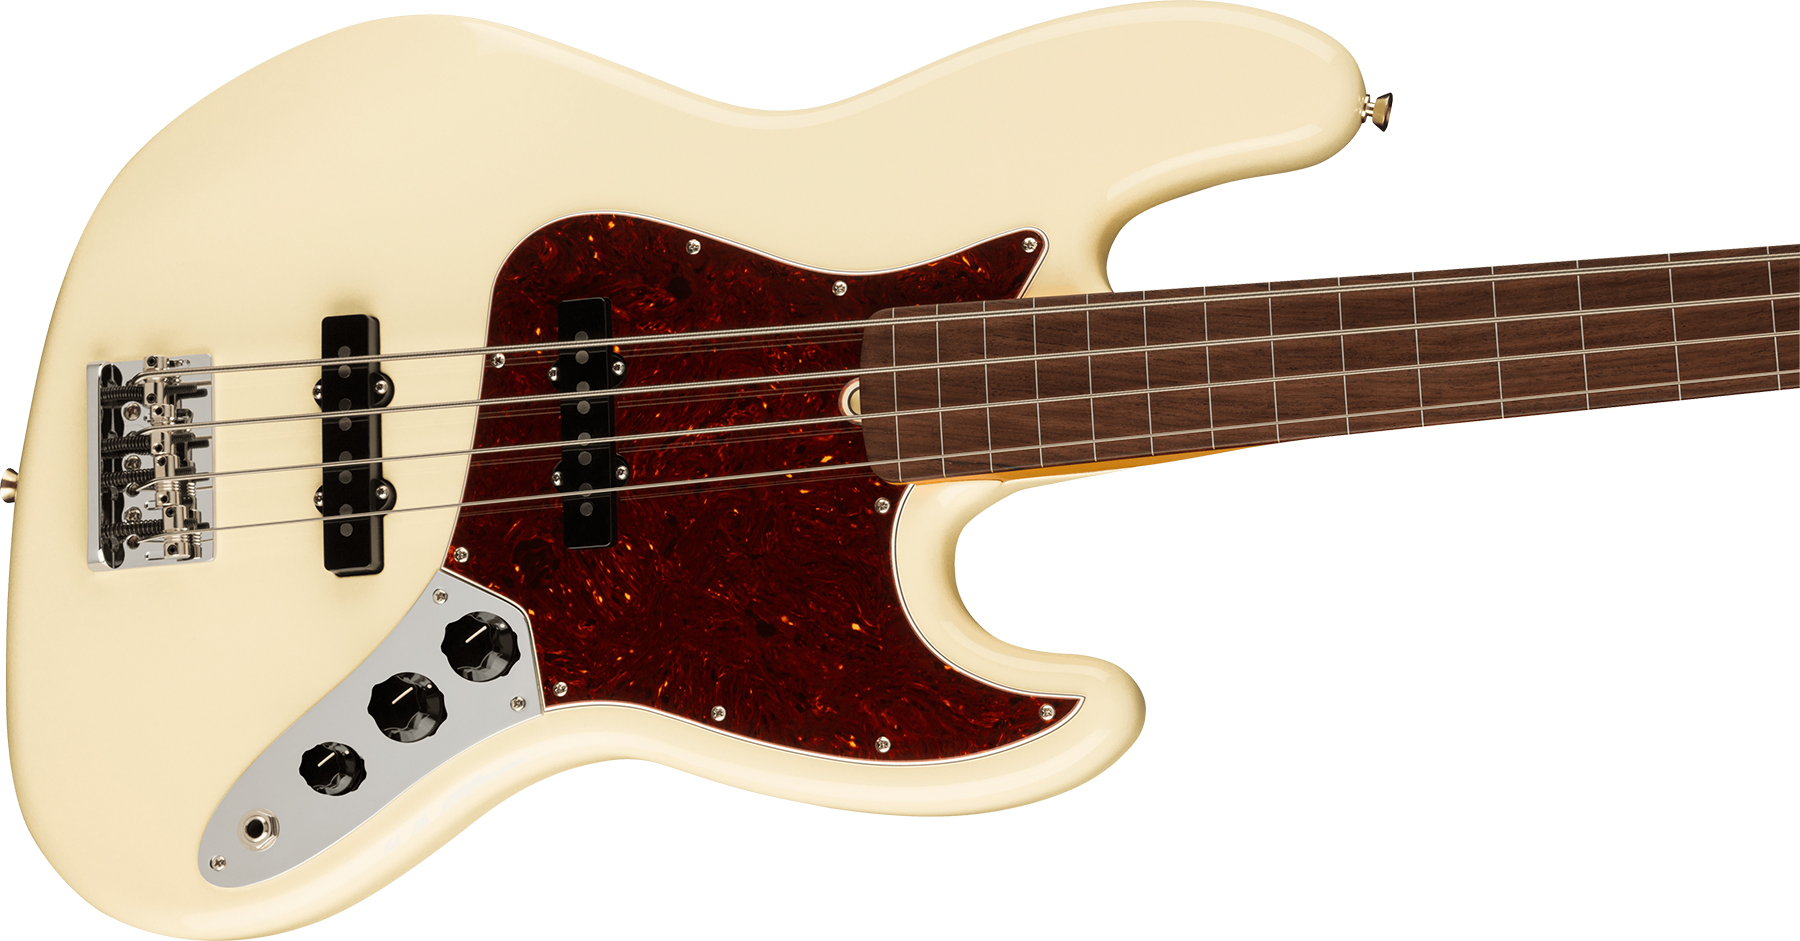 Fender Jazz Bass Fretless American Professional Ii Usa Rw - Olympic White - Basse Électrique Solid Body - Variation 2